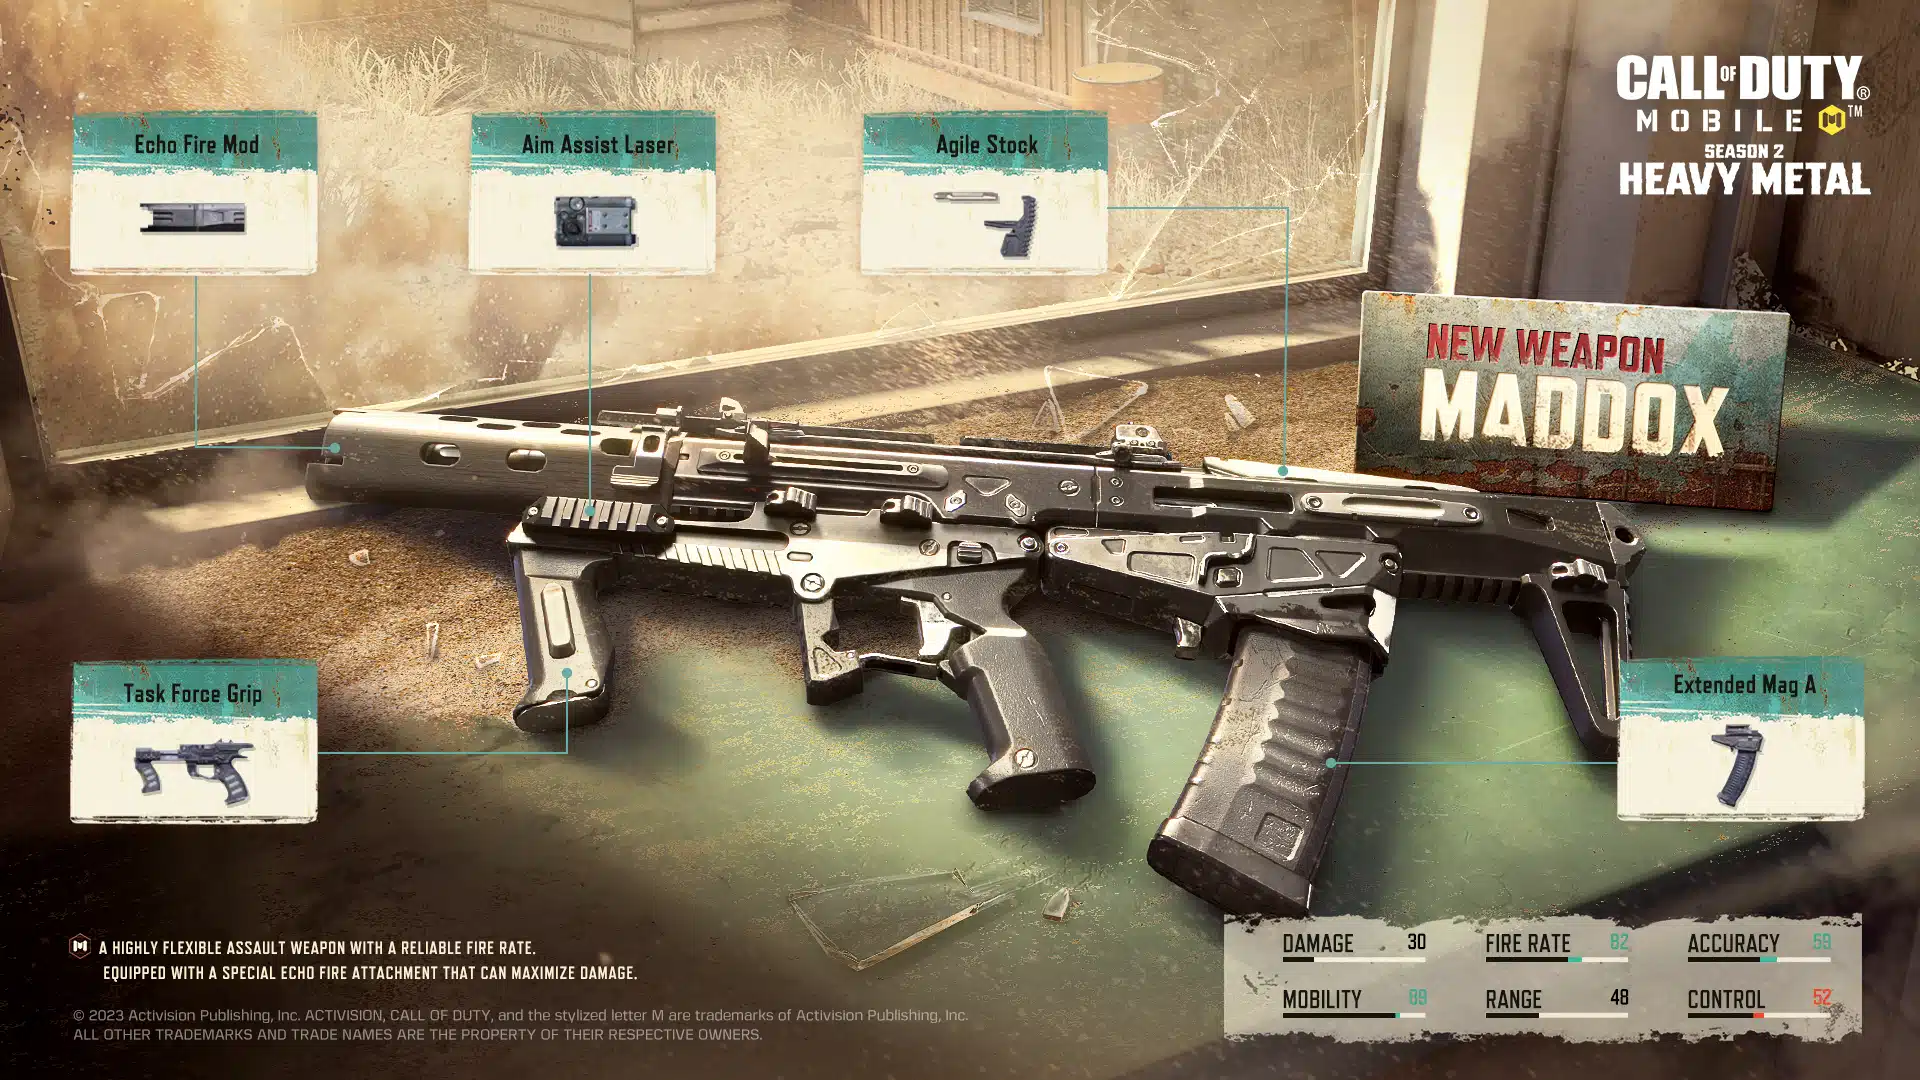 call of duty mobile maddox assault rifle